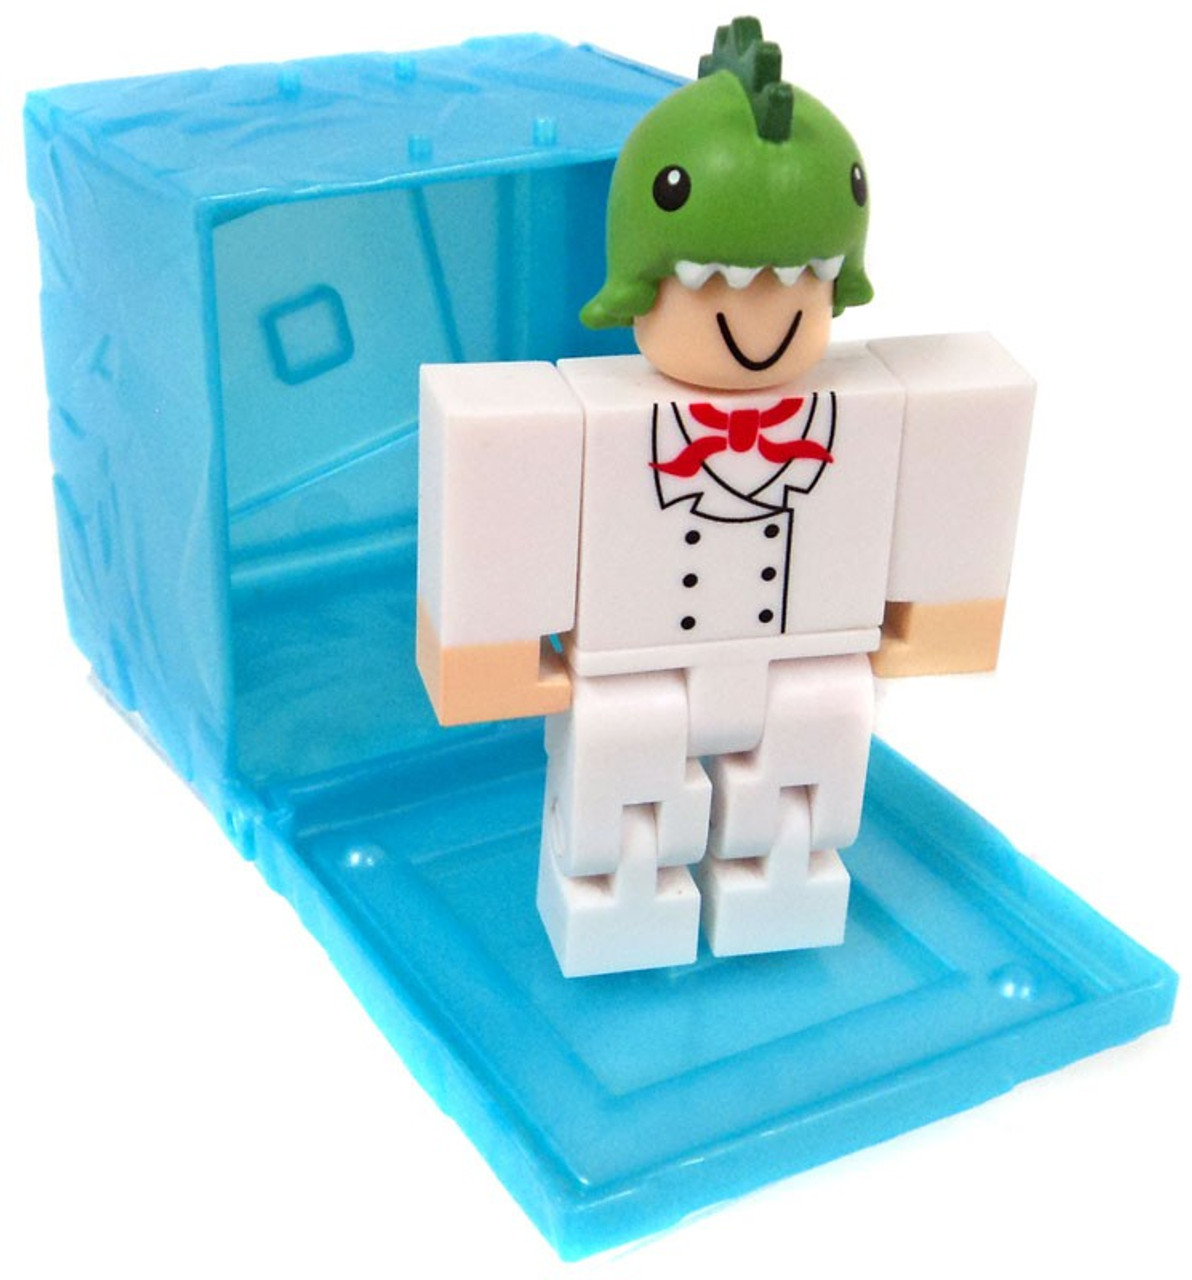 Roblox Red Series 3 Theme Park Tycoon Dino Vender 3 Mini Figure Blue Cube With Online Code Loose Jazwares Toywiz - ks neon roblox